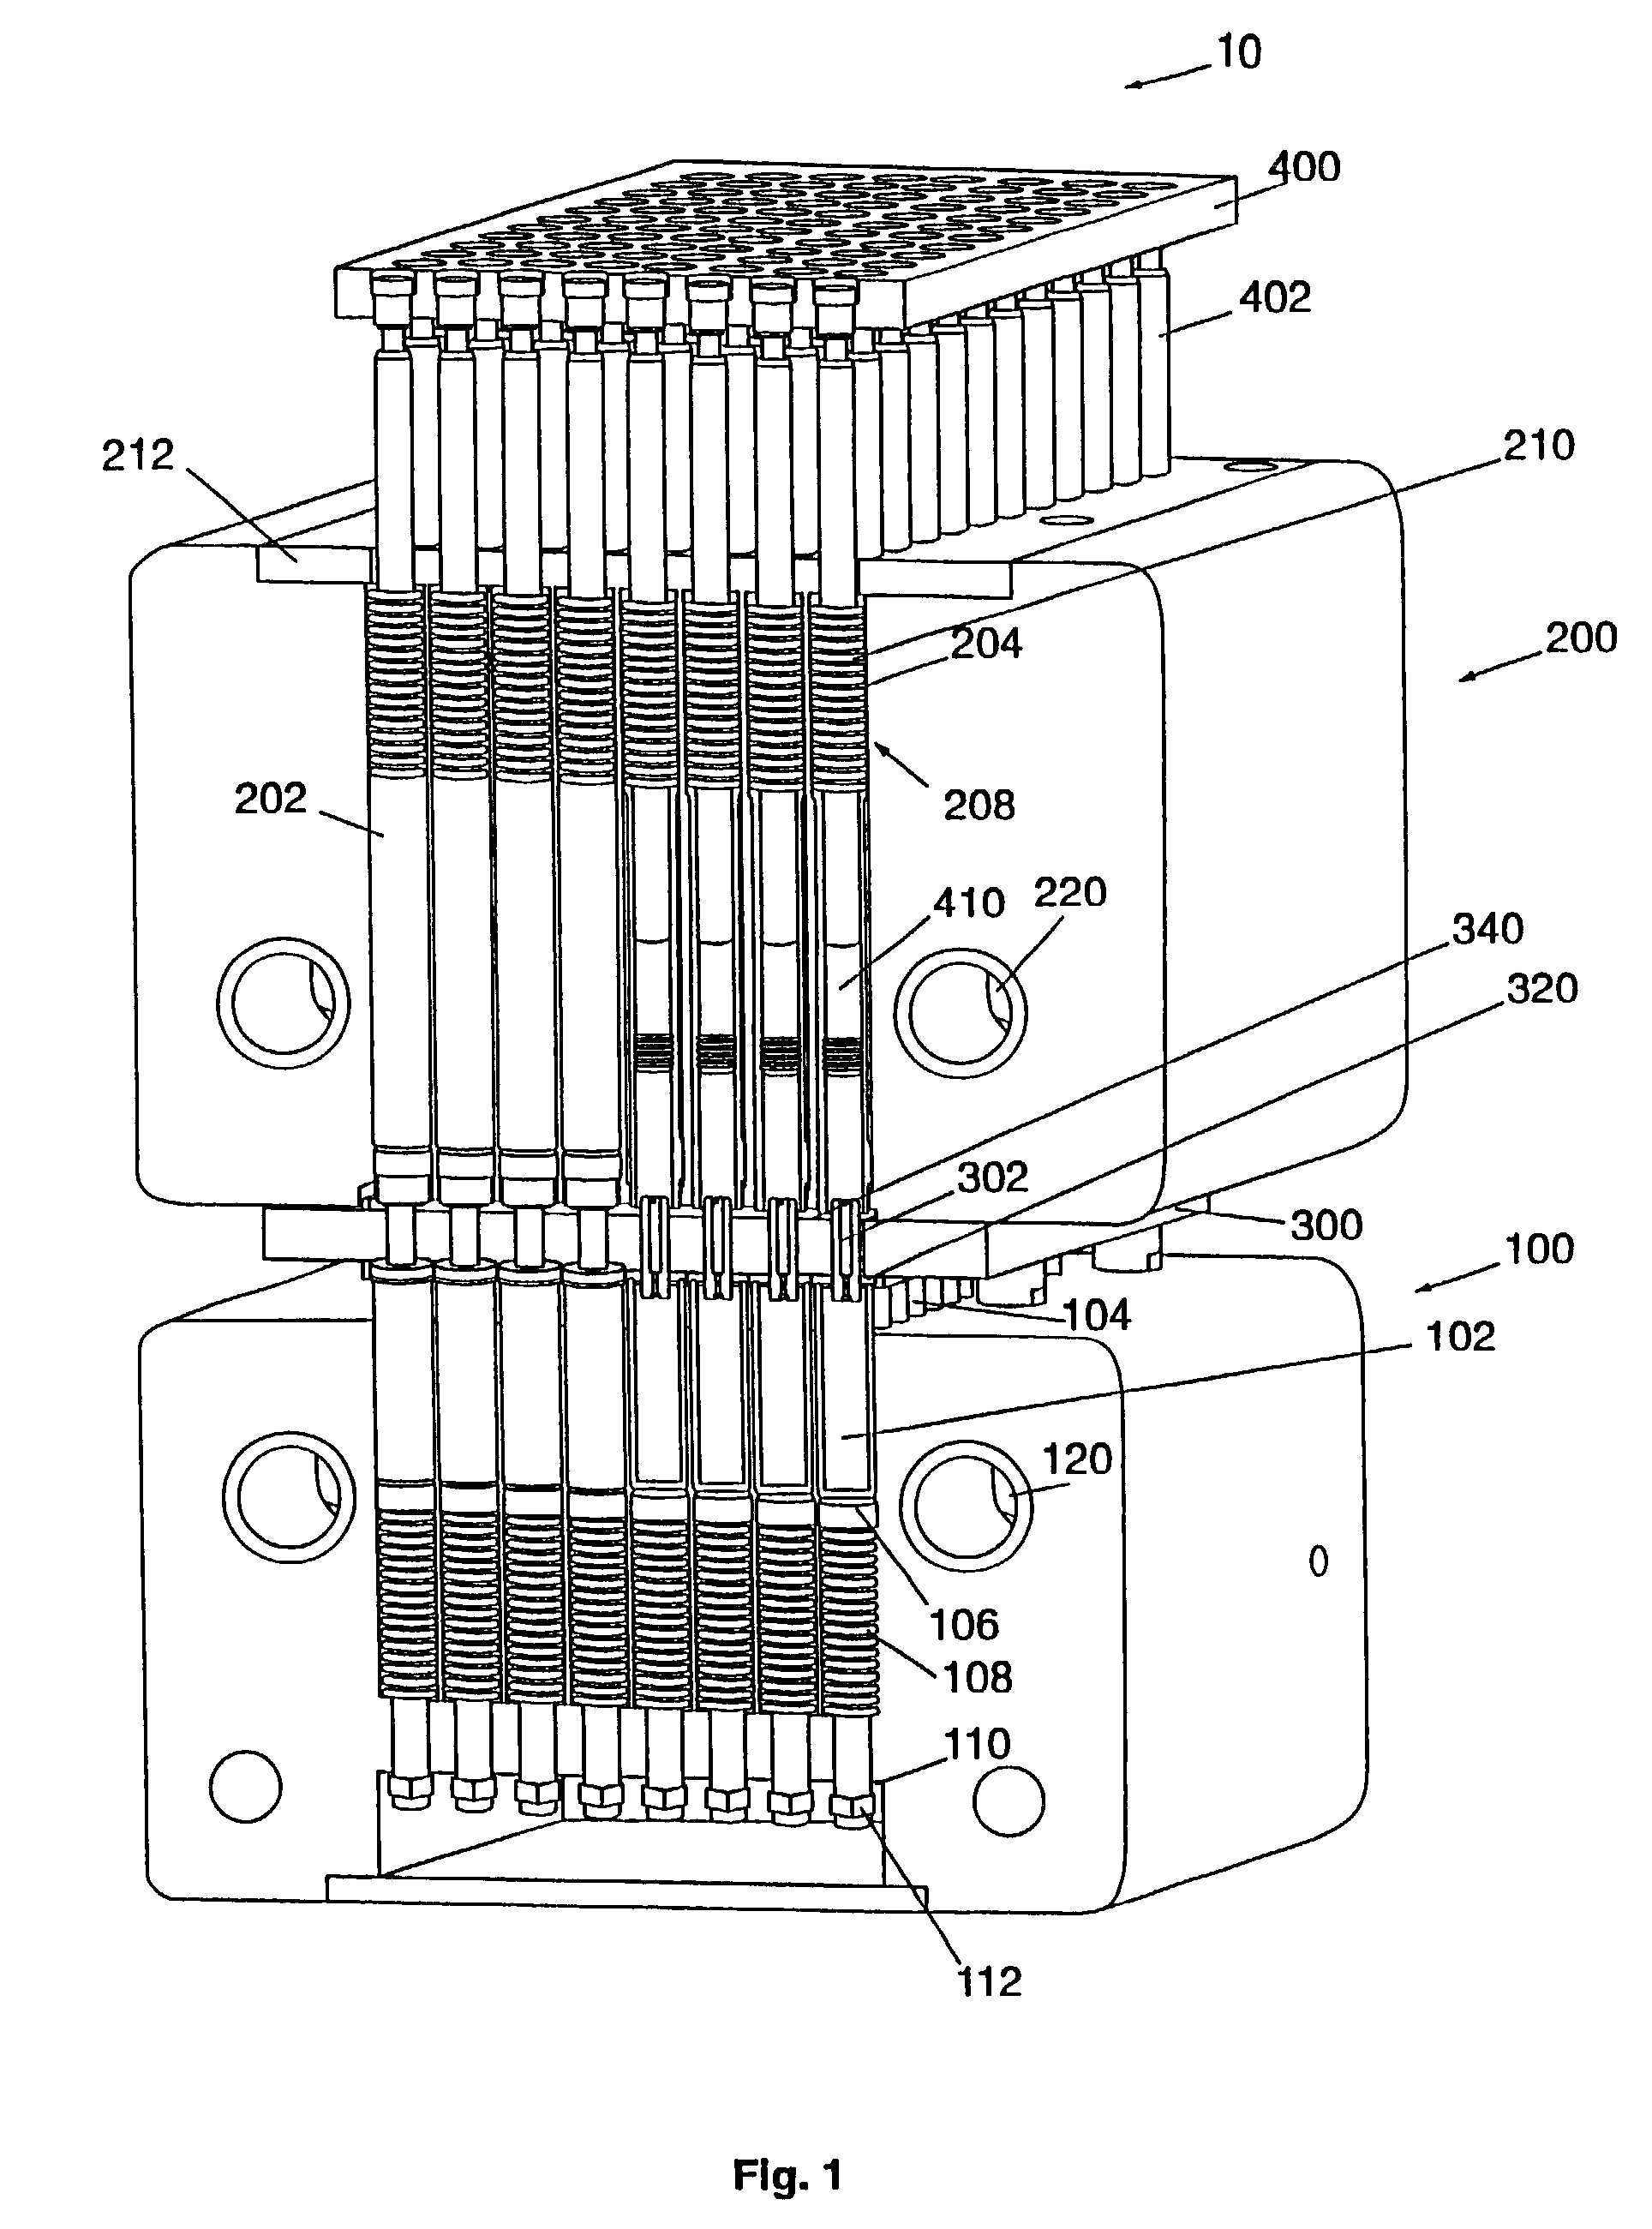 Parallel semi-continuous or continuous reactor system